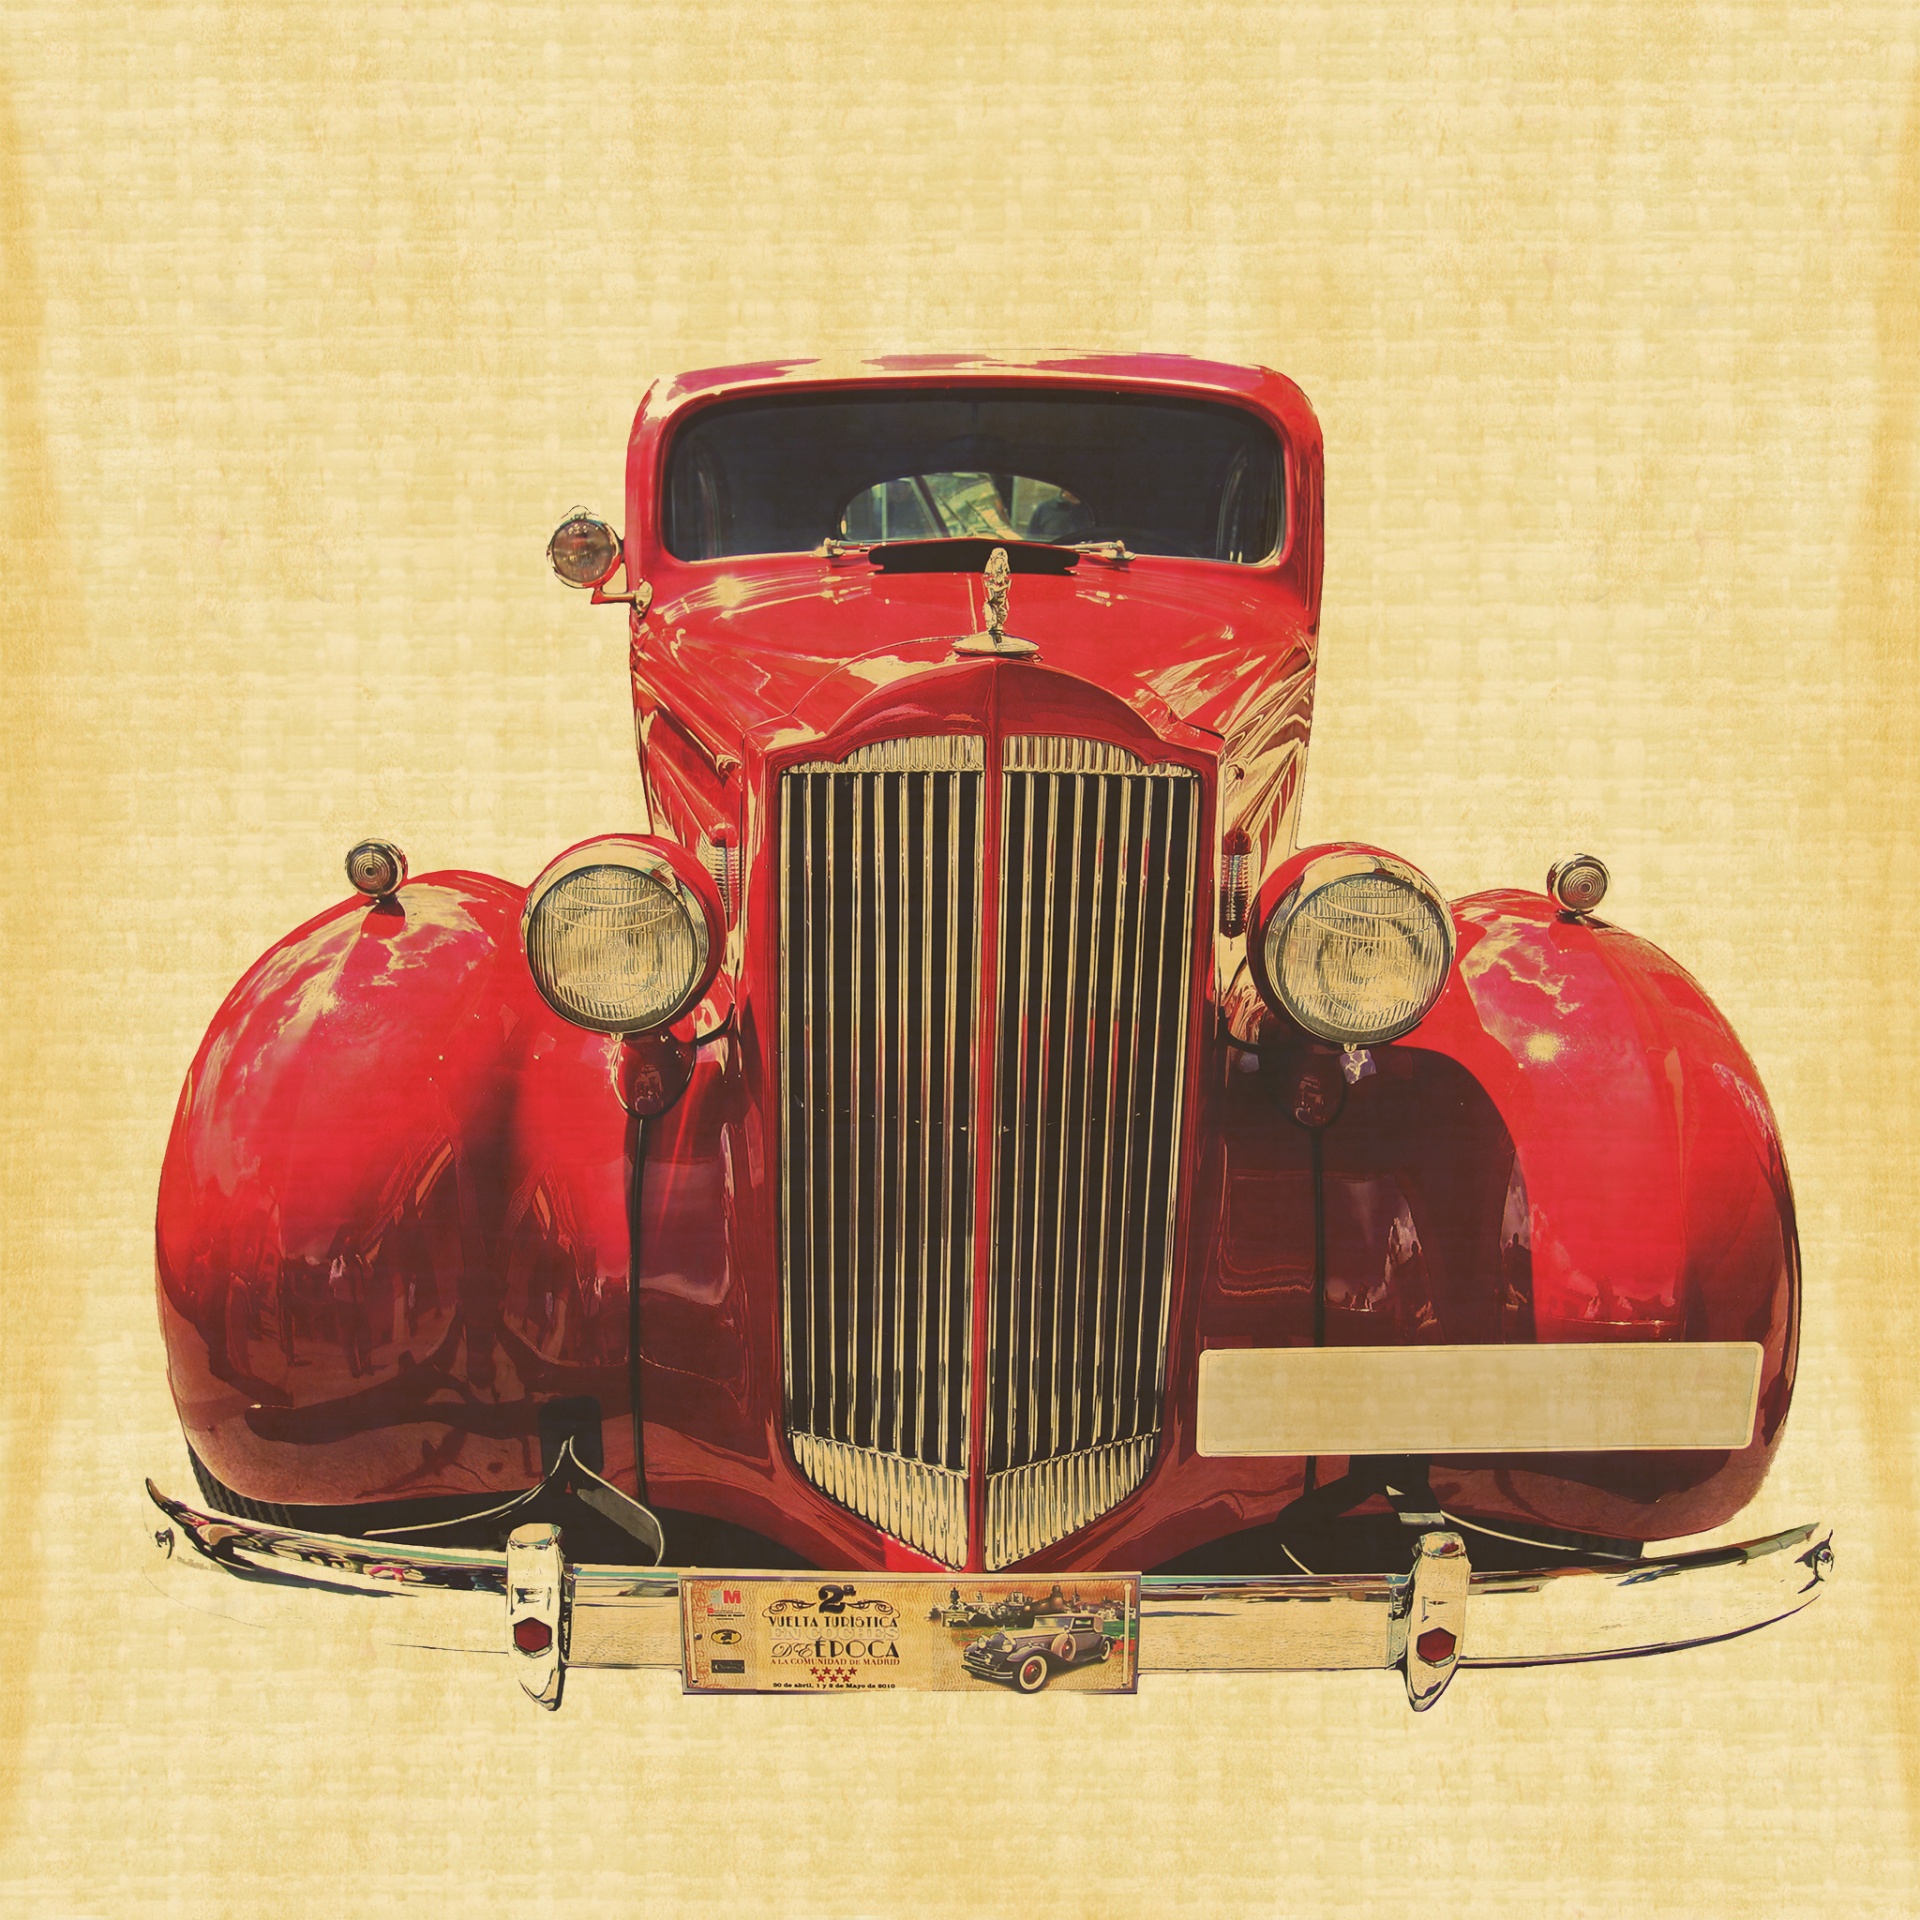 Red vintage car for scrapbooking and other